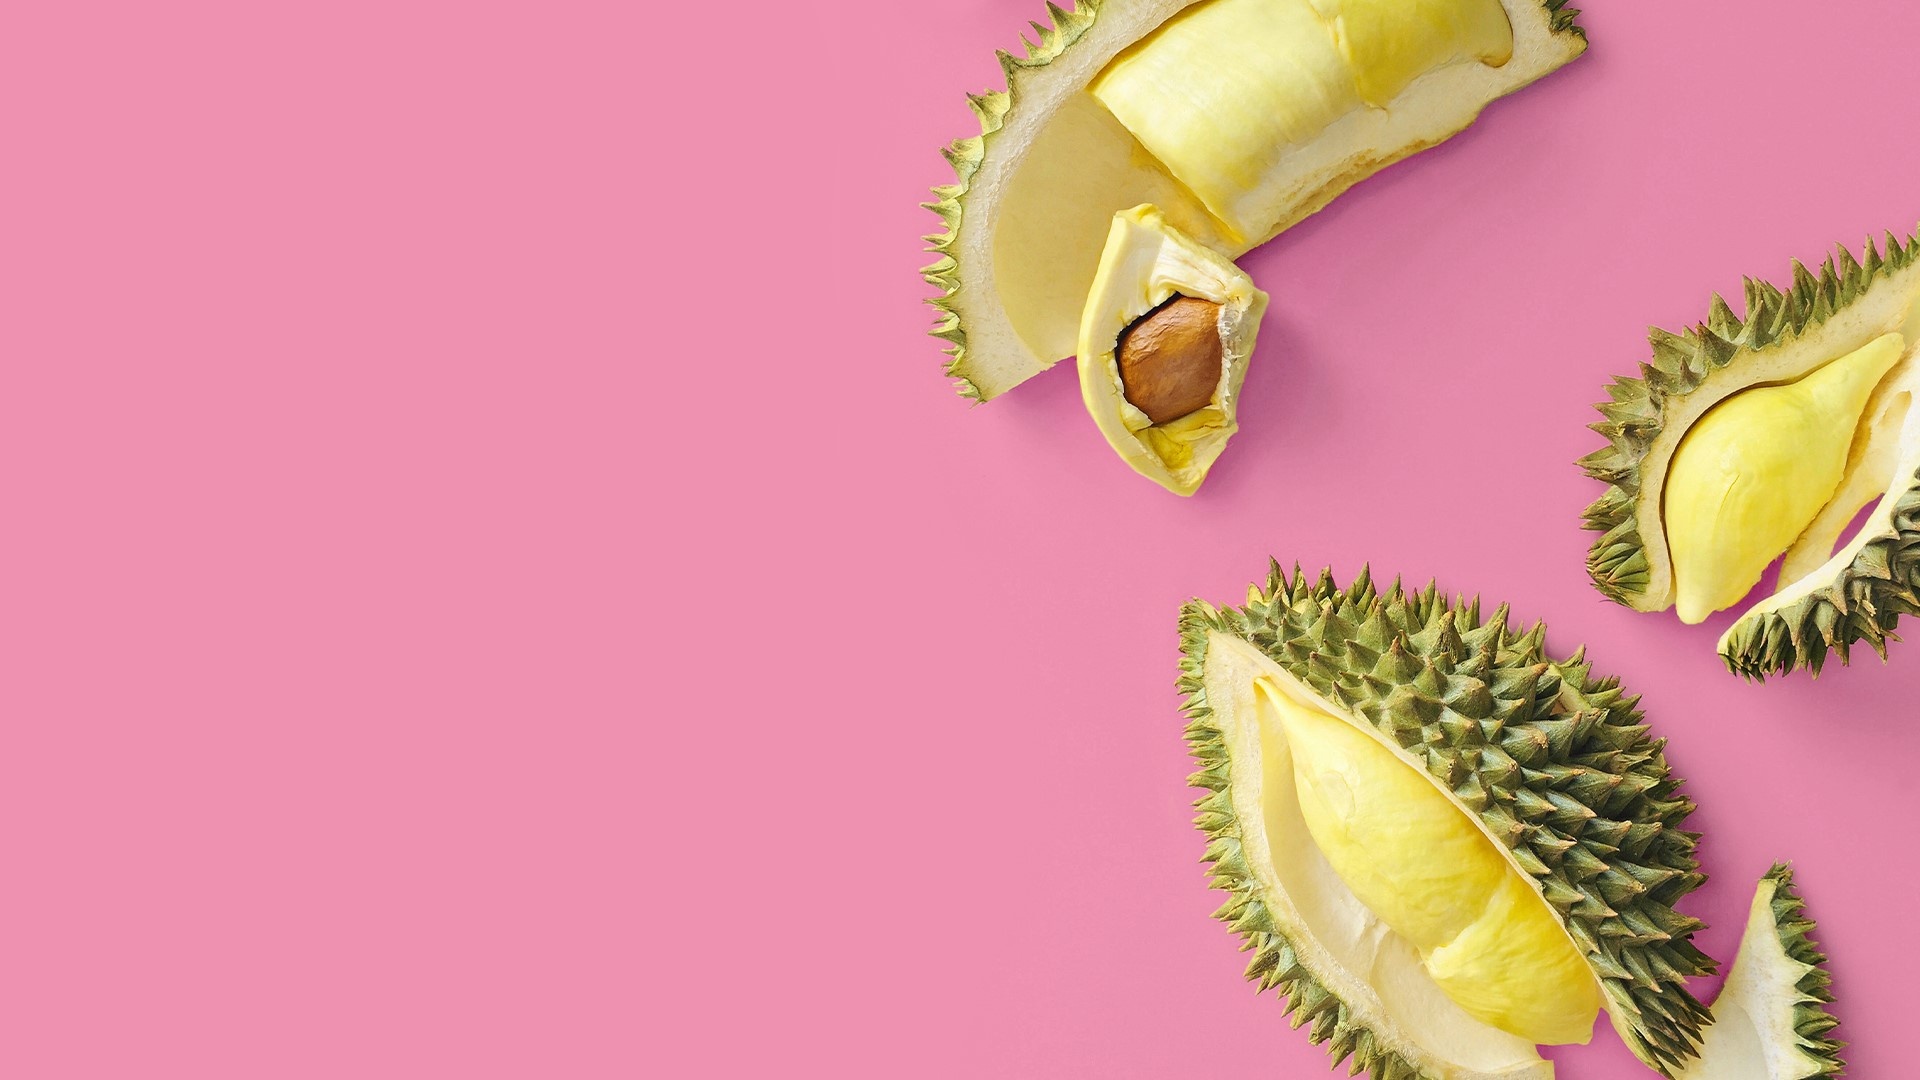 Durian: Used to flavor a variety of sweet edibles such as traditional Malay candy. 1920x1080 Full HD Wallpaper.